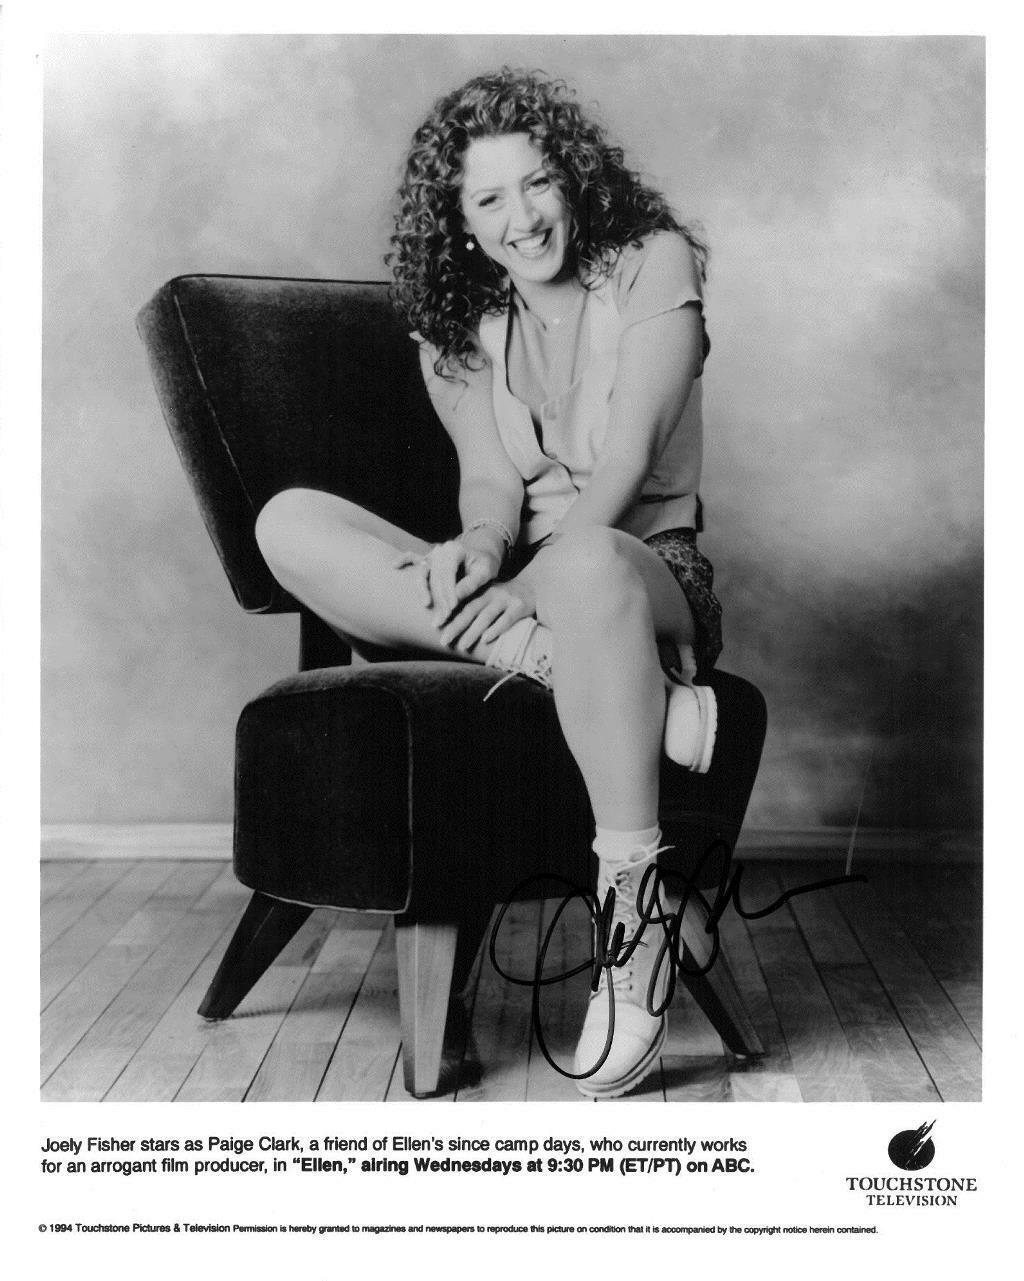 Joely Fisher Signed Authentic Autographed 8x10 B/W Photo Poster painting PSA/DNA #AE98636